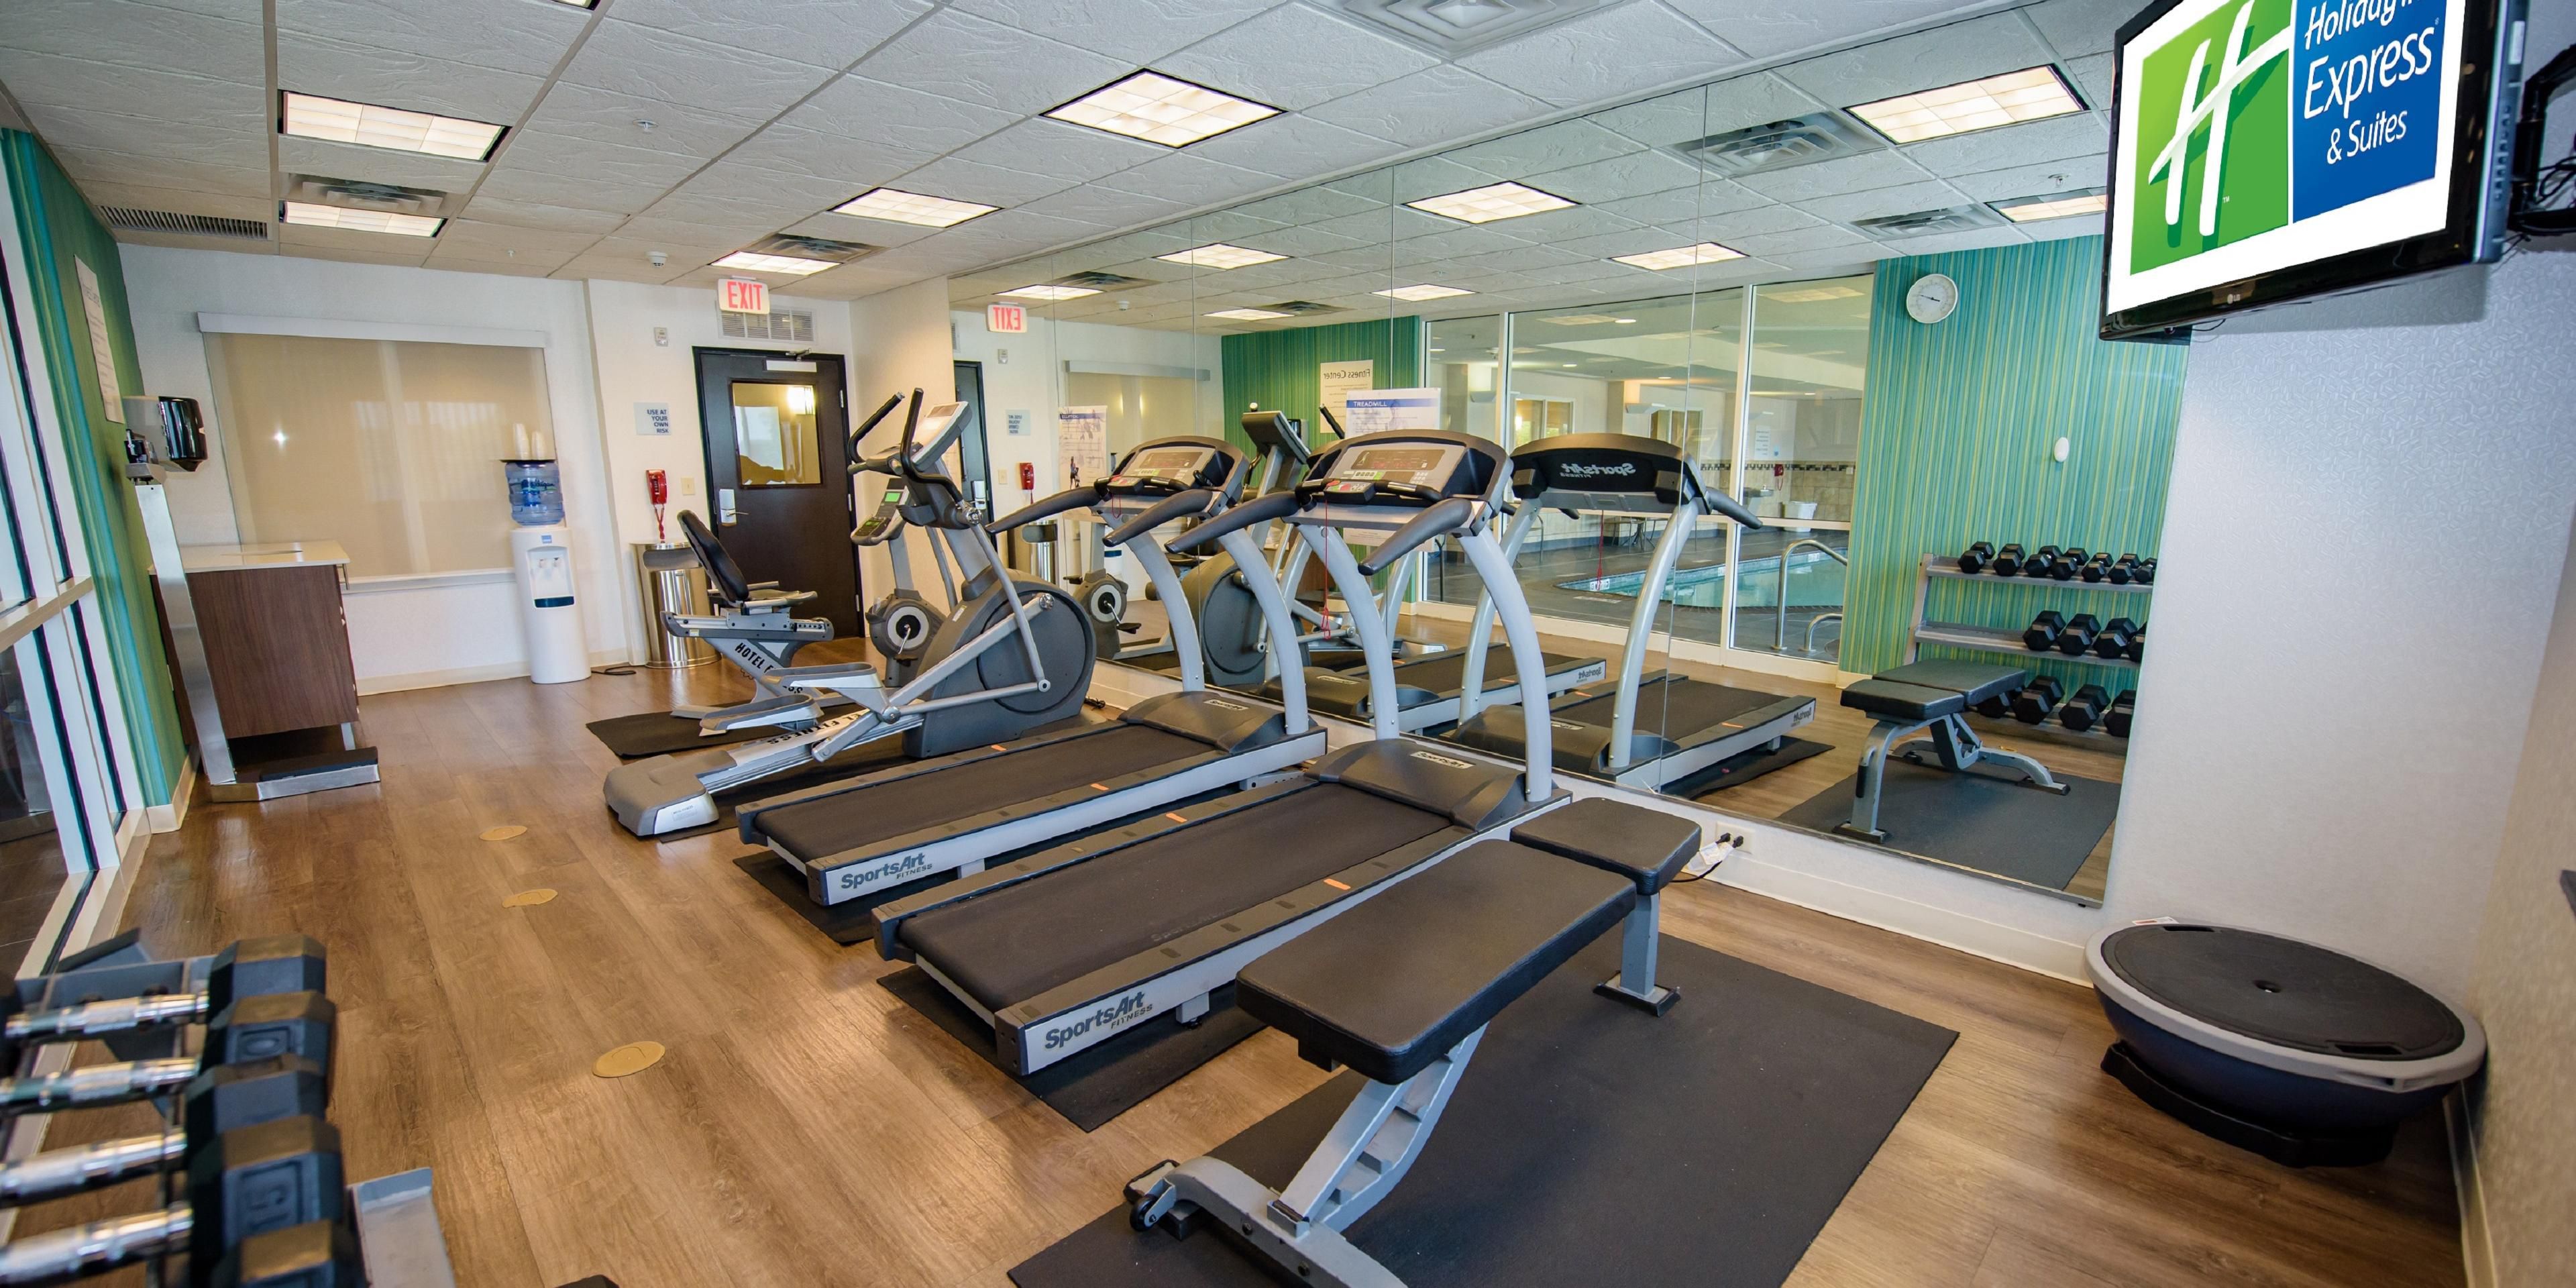 Our overnight guests can take advantage of our 24 Hour Fitness Center complete with free weights, exercise balls, tandem bikes, ellipticals and treadmills.